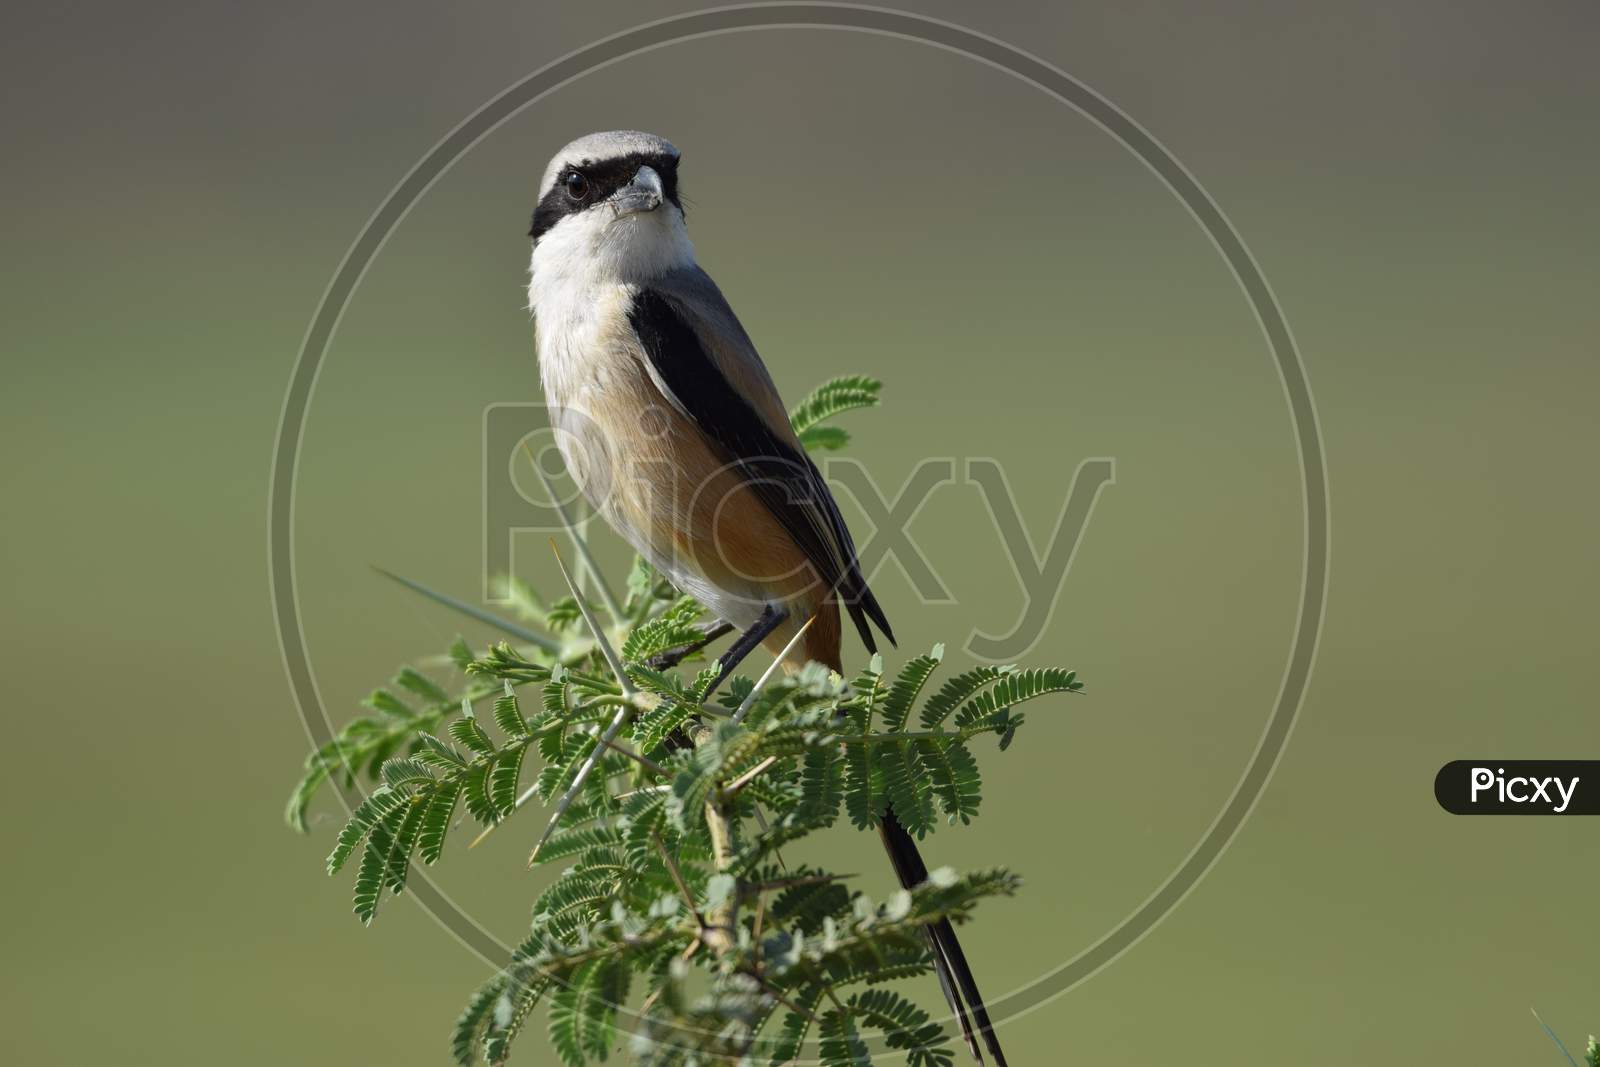 Close Up Full Shot Of Bay Backed Shrike Bird Perching On A Thorn Bush Branch In Morning In India Asia